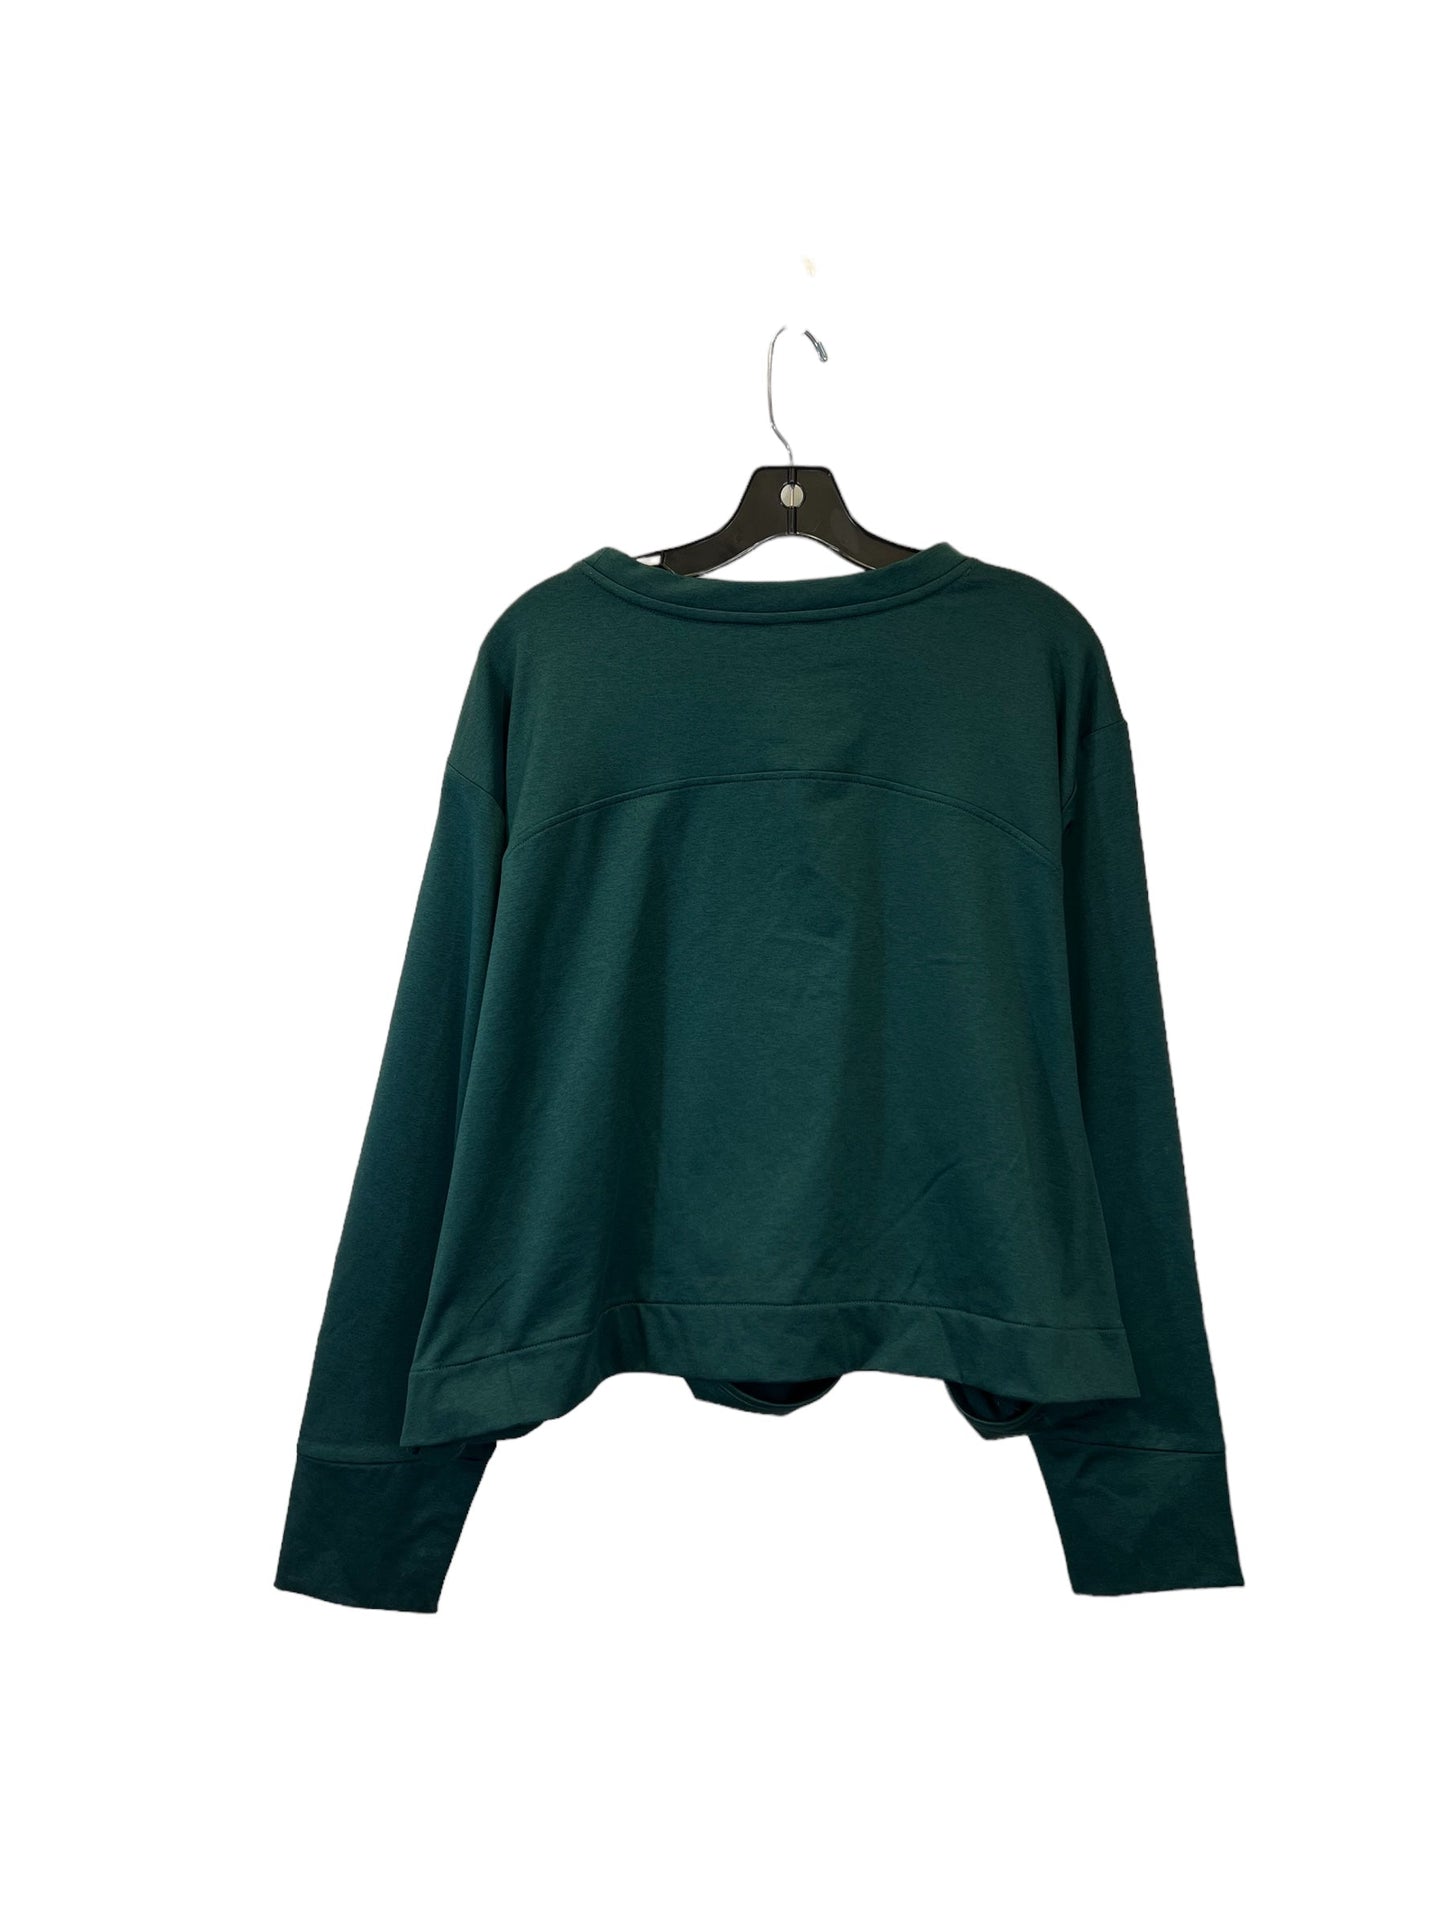 Athletic Top Long Sleeve Crewneck By Mta Pro  Size: 3x